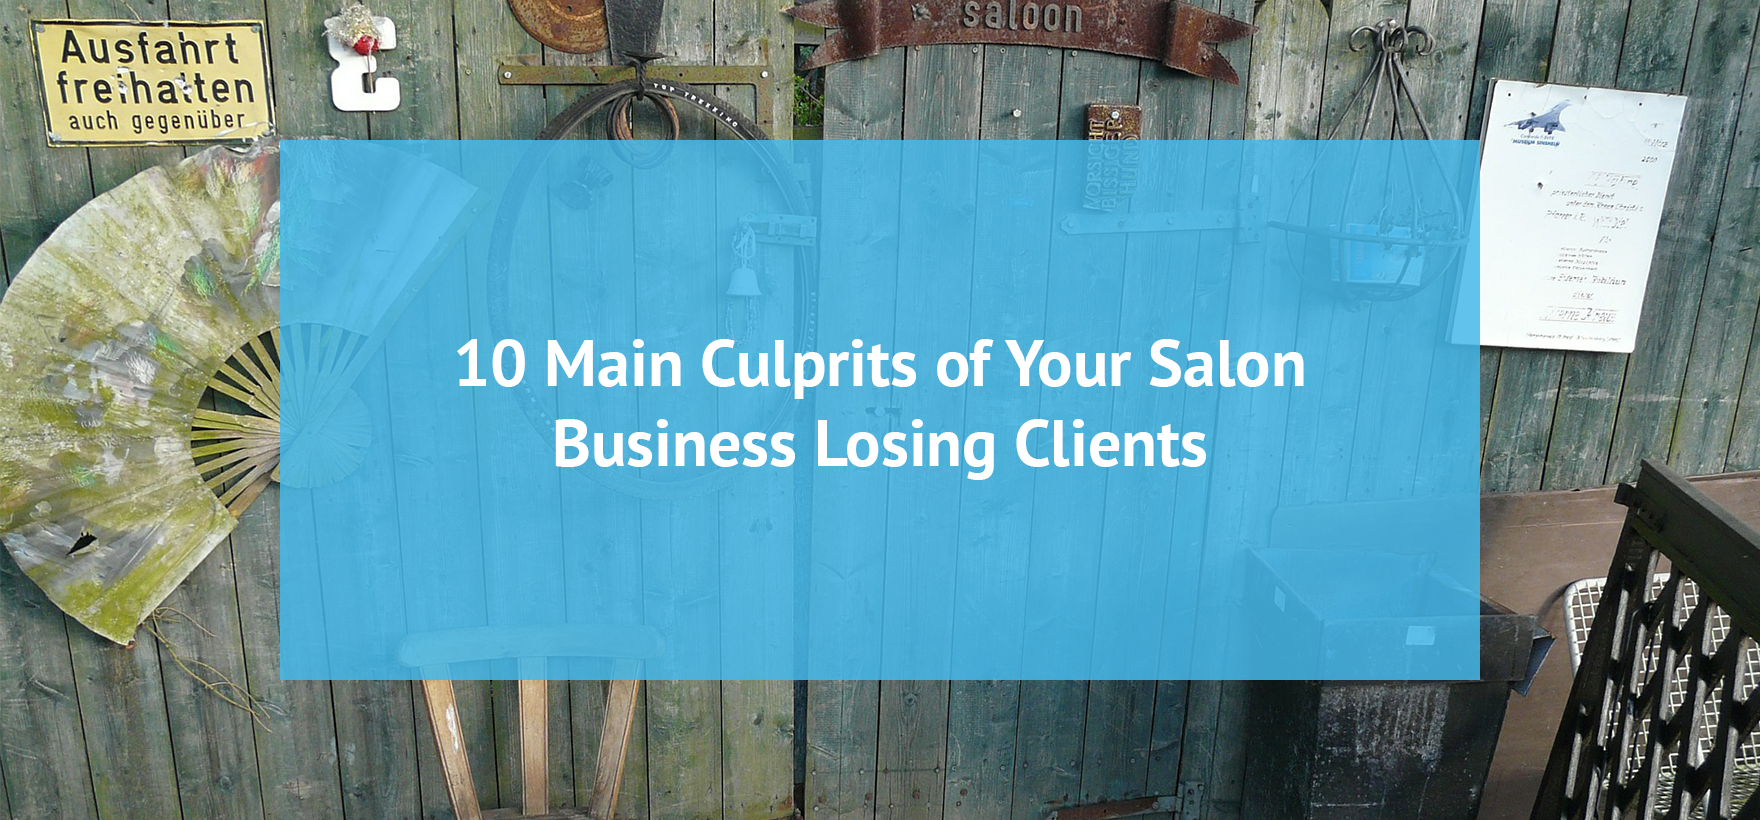 10 Main Culprits of Your Salon Business Losing Clients